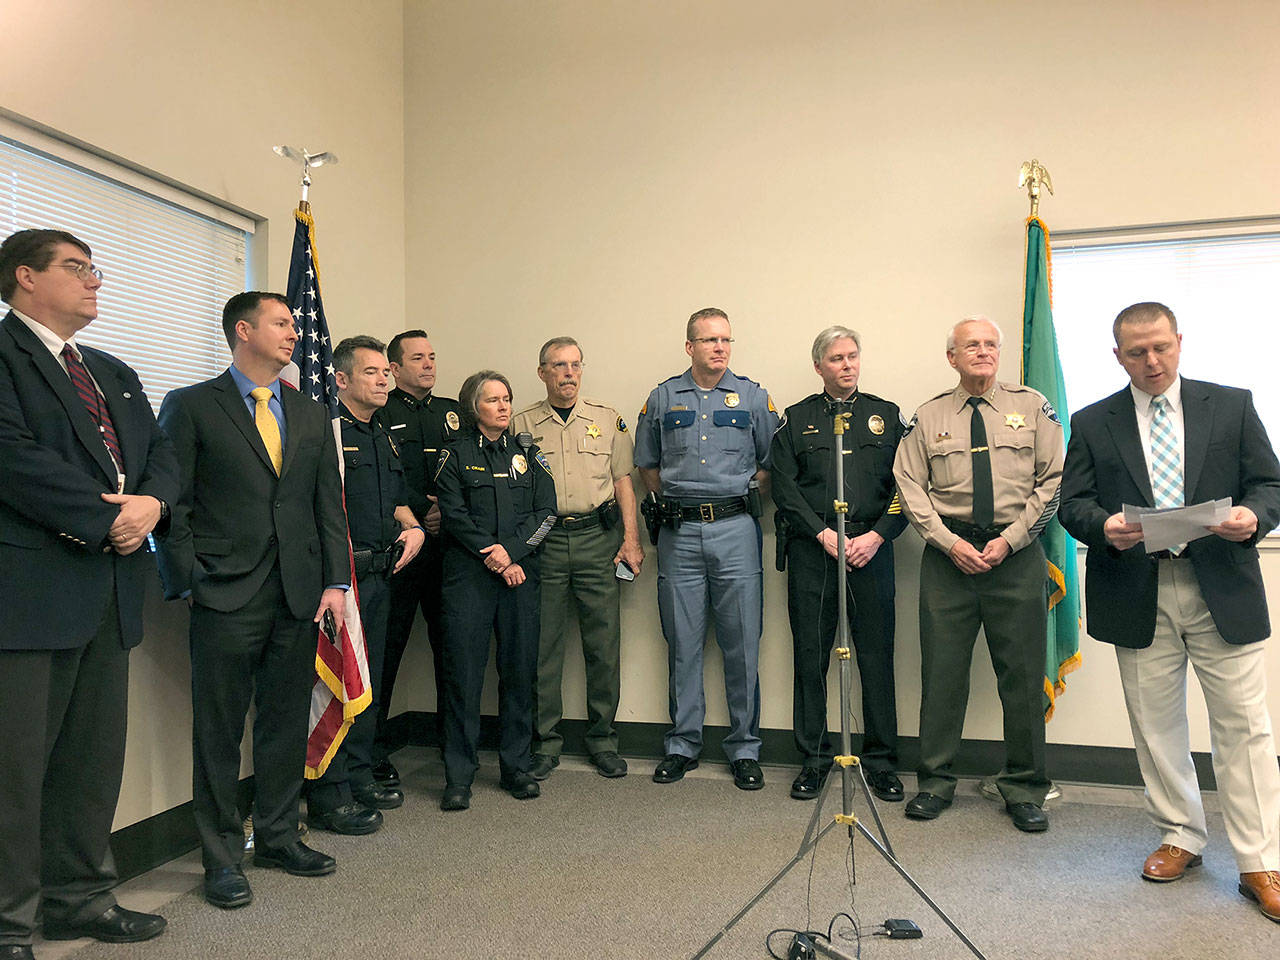 More than 60 law enforcement officials worked together to run an operation in Jefferson County targeting sexual predators. Representatives of the agencies held a press conference Tuesday morning to detail their collaboration, which led to 10 arrests. From left are Jefferson County Prosecutor Michael Haas, Clallam County Prosecutor Mark Nichols, Port Angeles Police Chief Brian Smith, Poulsbo Police Chief Dan Schoonmaker, Sequim Police Chief Sheri Crain, Clallam County Sheriff Bill Benedict, State Patrol Capt. Chris Old, Port Townsend Police Chief Michael Evans, State Patrol Lt. James Mjor and Jefferson County Sheriff David Stanko. (Jeannie McMacken/Peninsula Daily News)